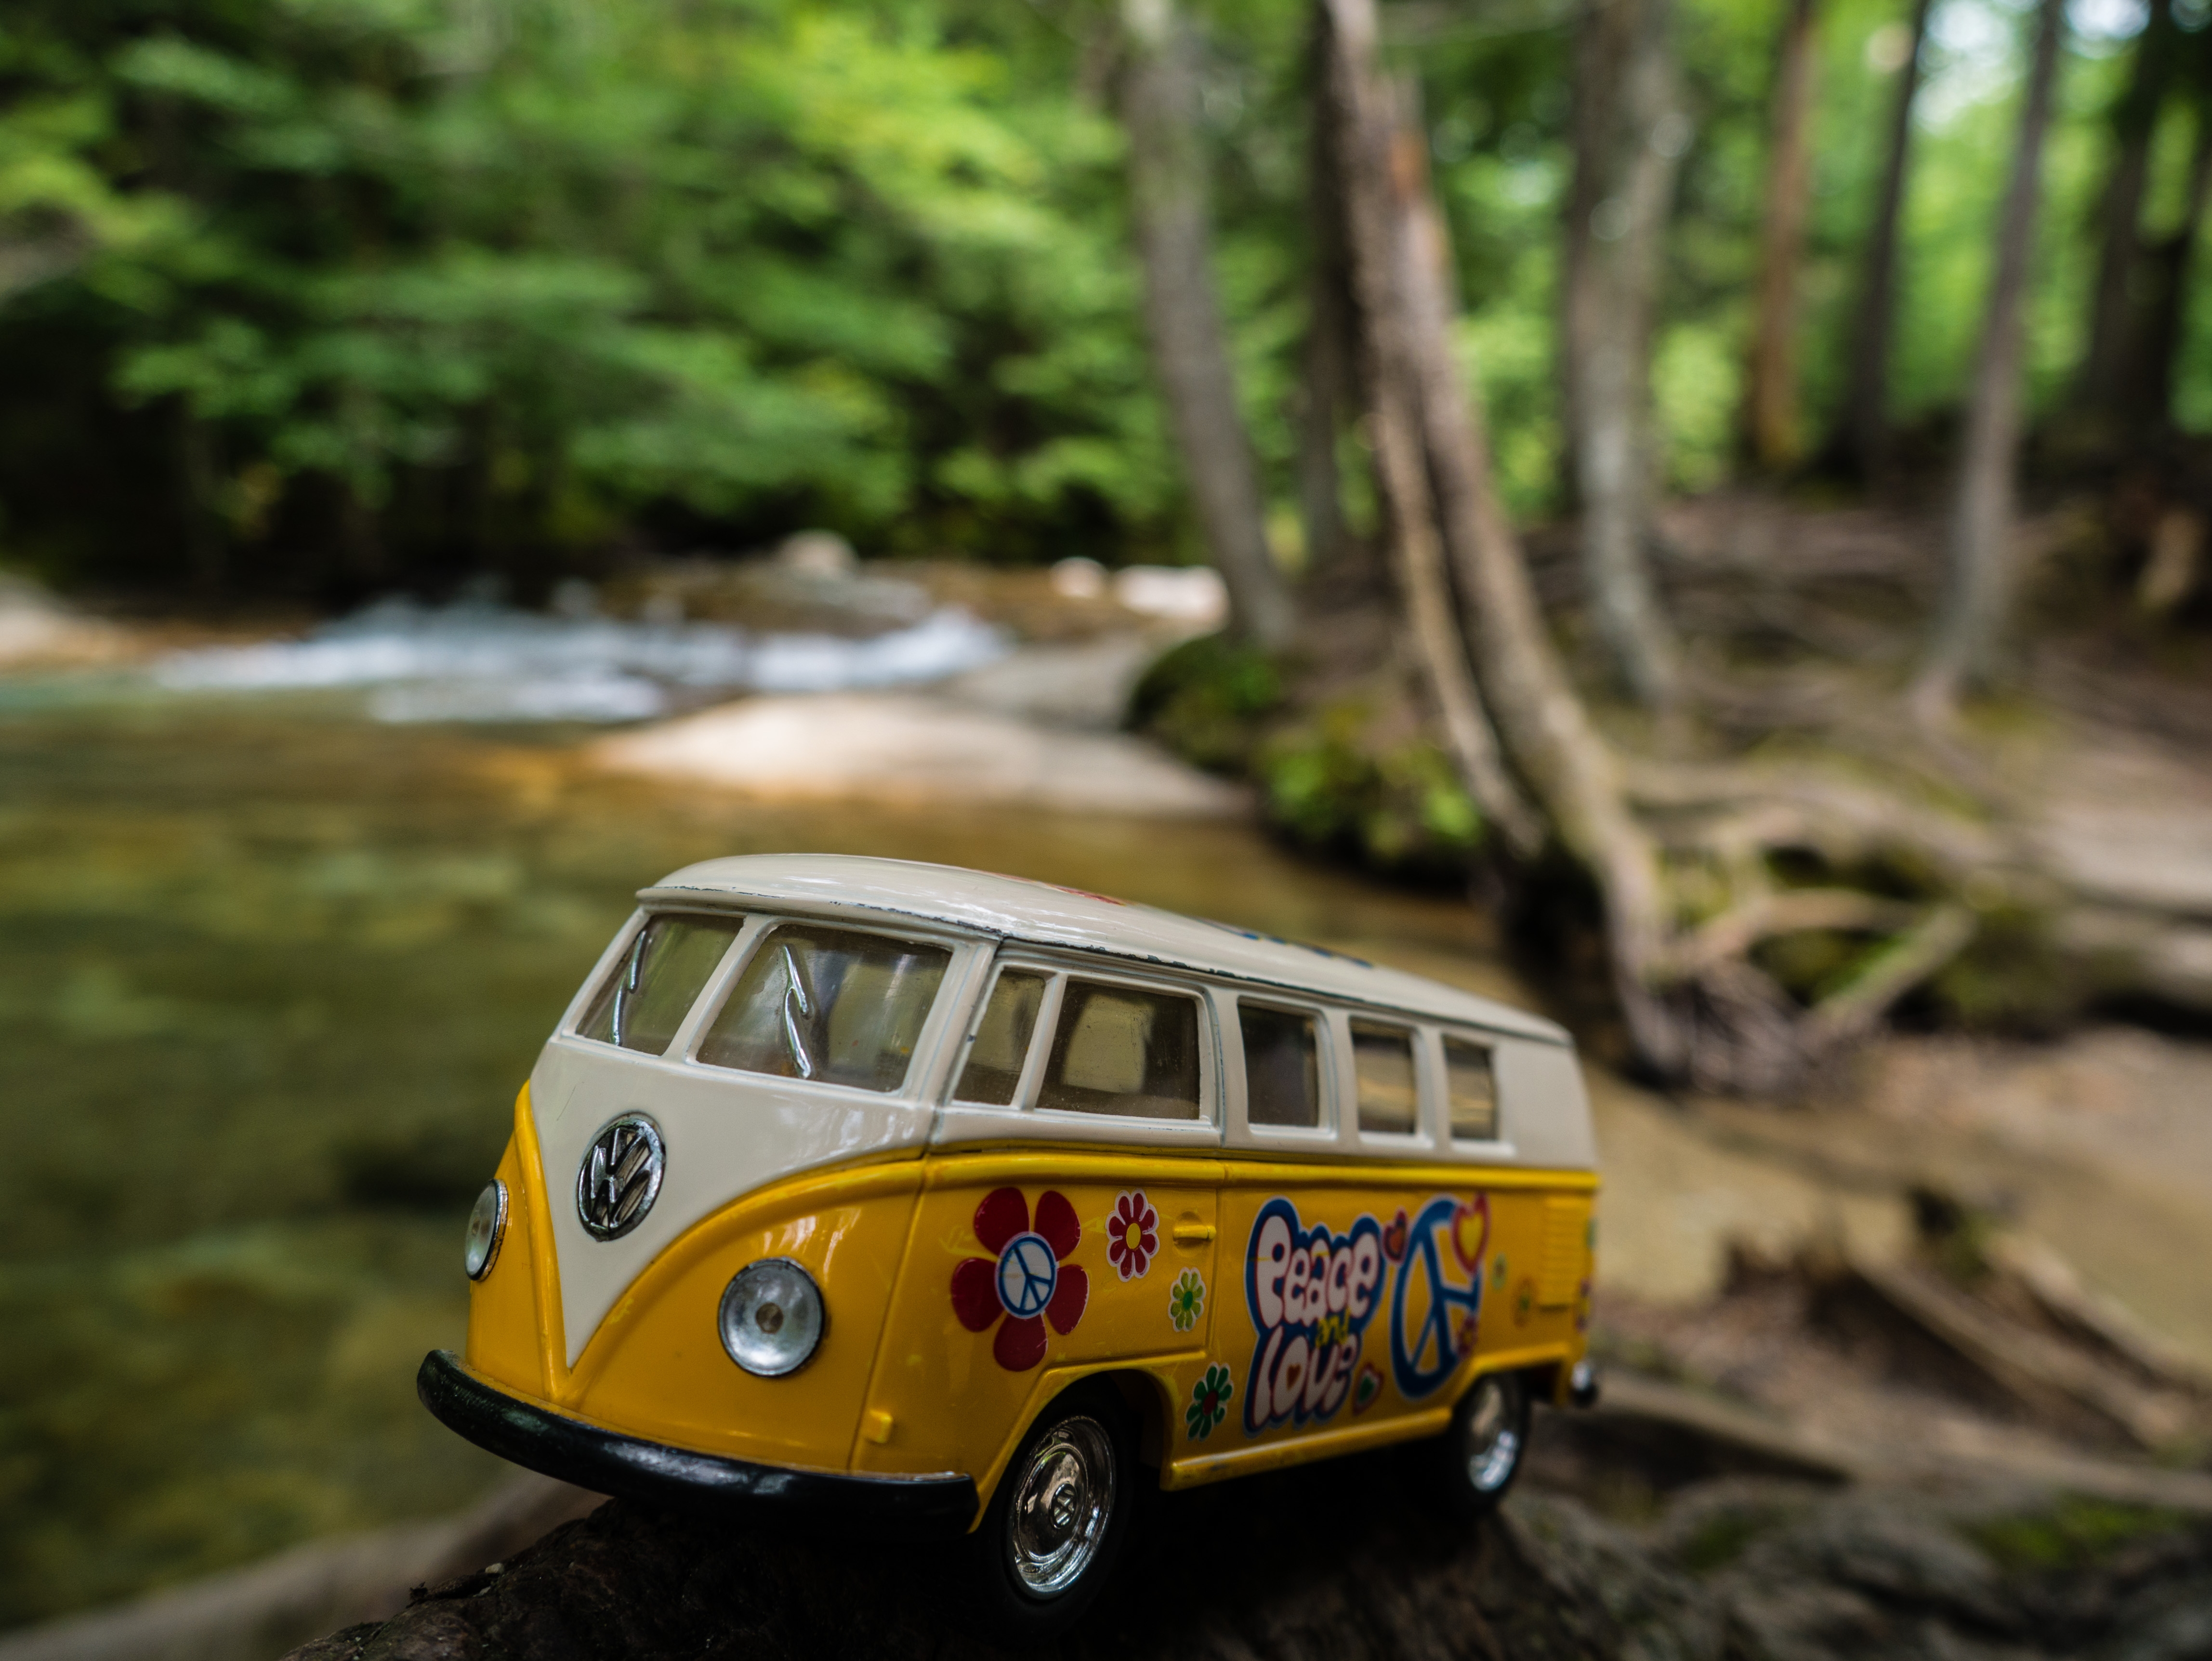 The Yellow Van by A river in Franconia Notch on the way to the Basin